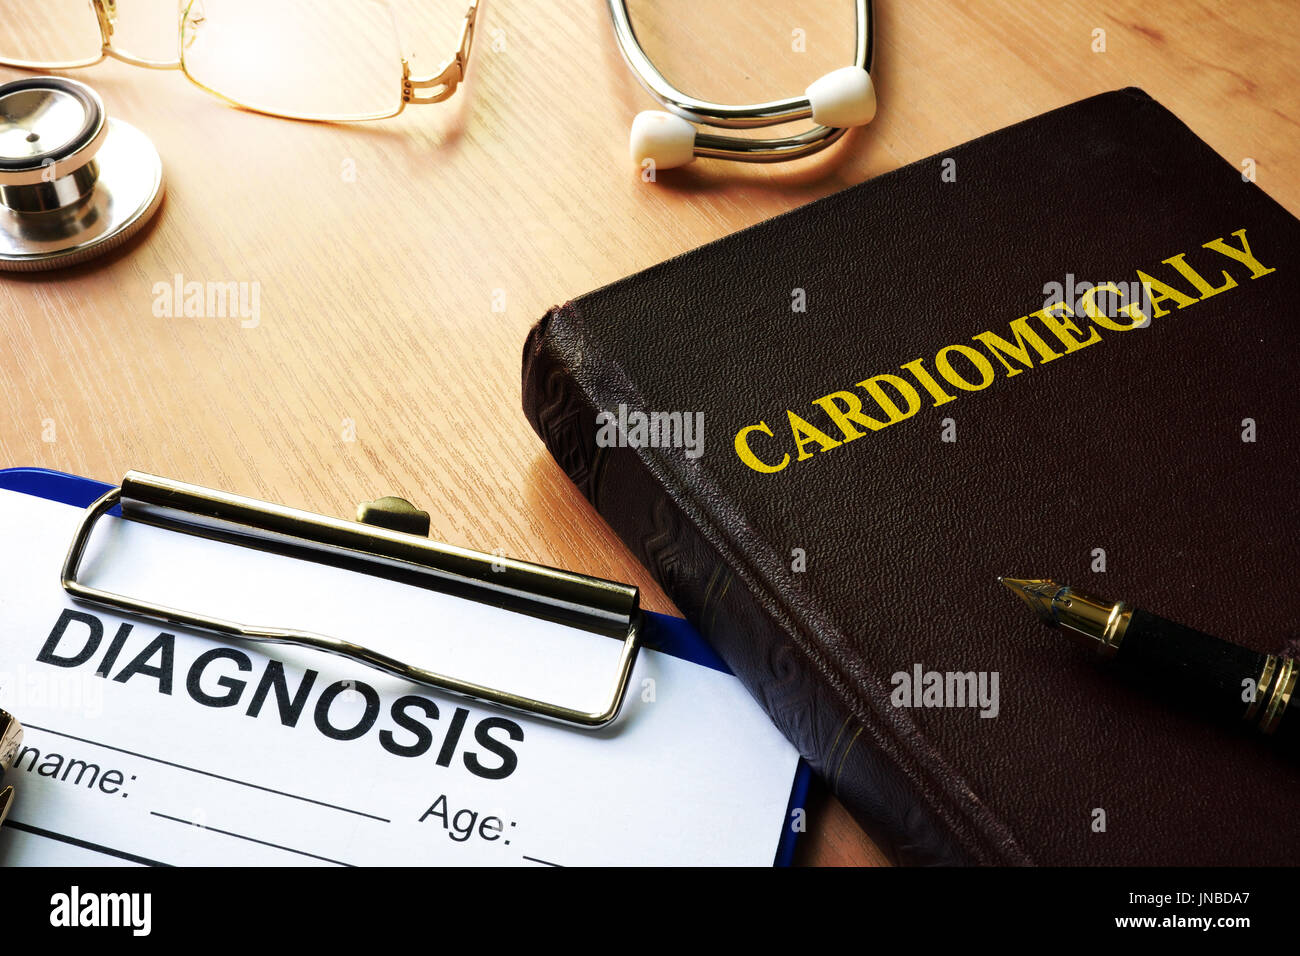 Cardiomegaly written on a front a book. Stock Photo